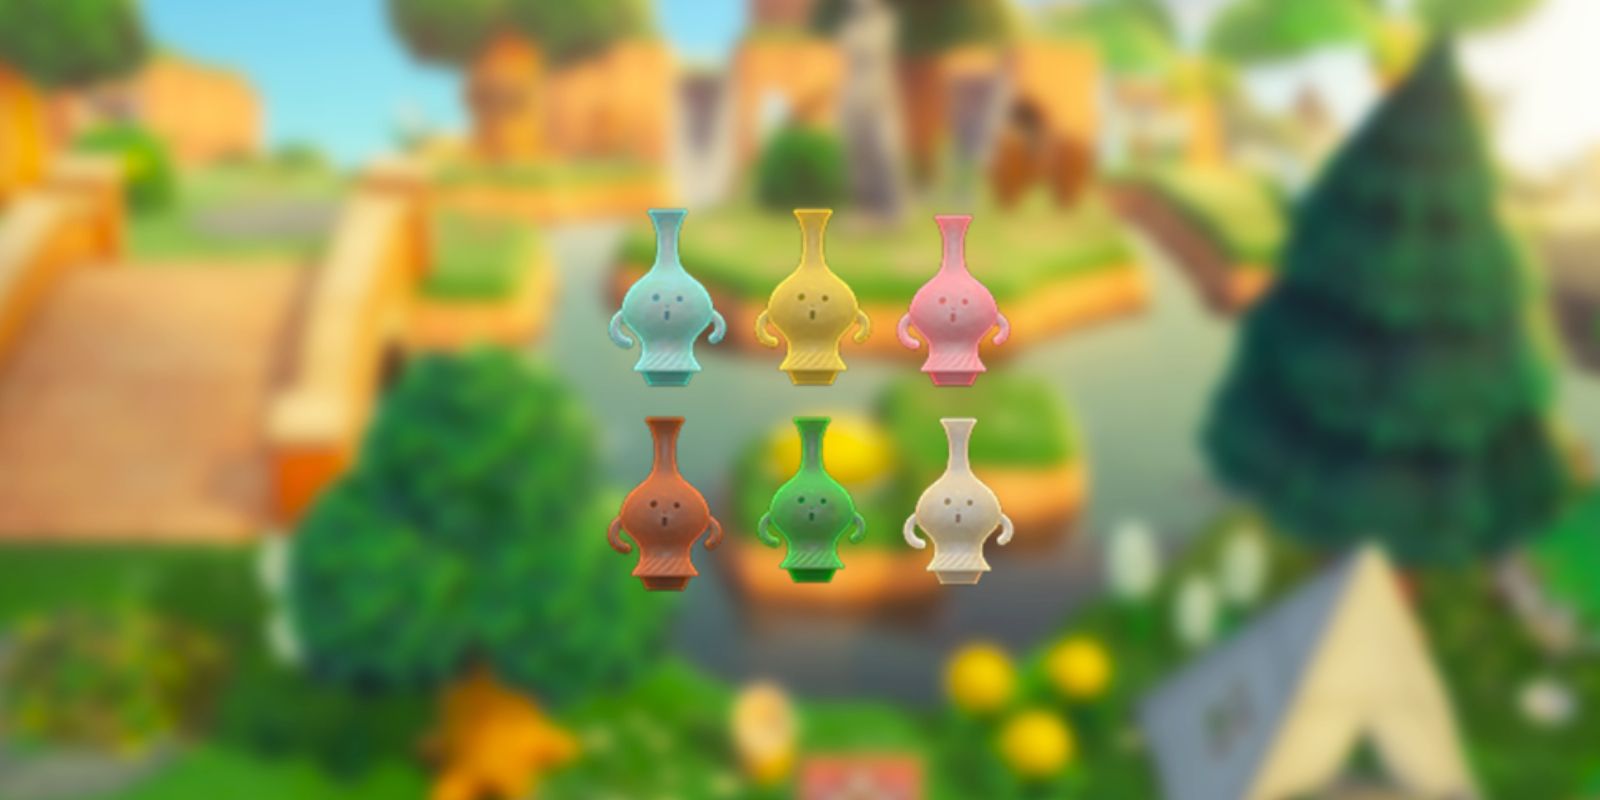 All New Gyroids In Animal Crossing 2.0 Whistloid